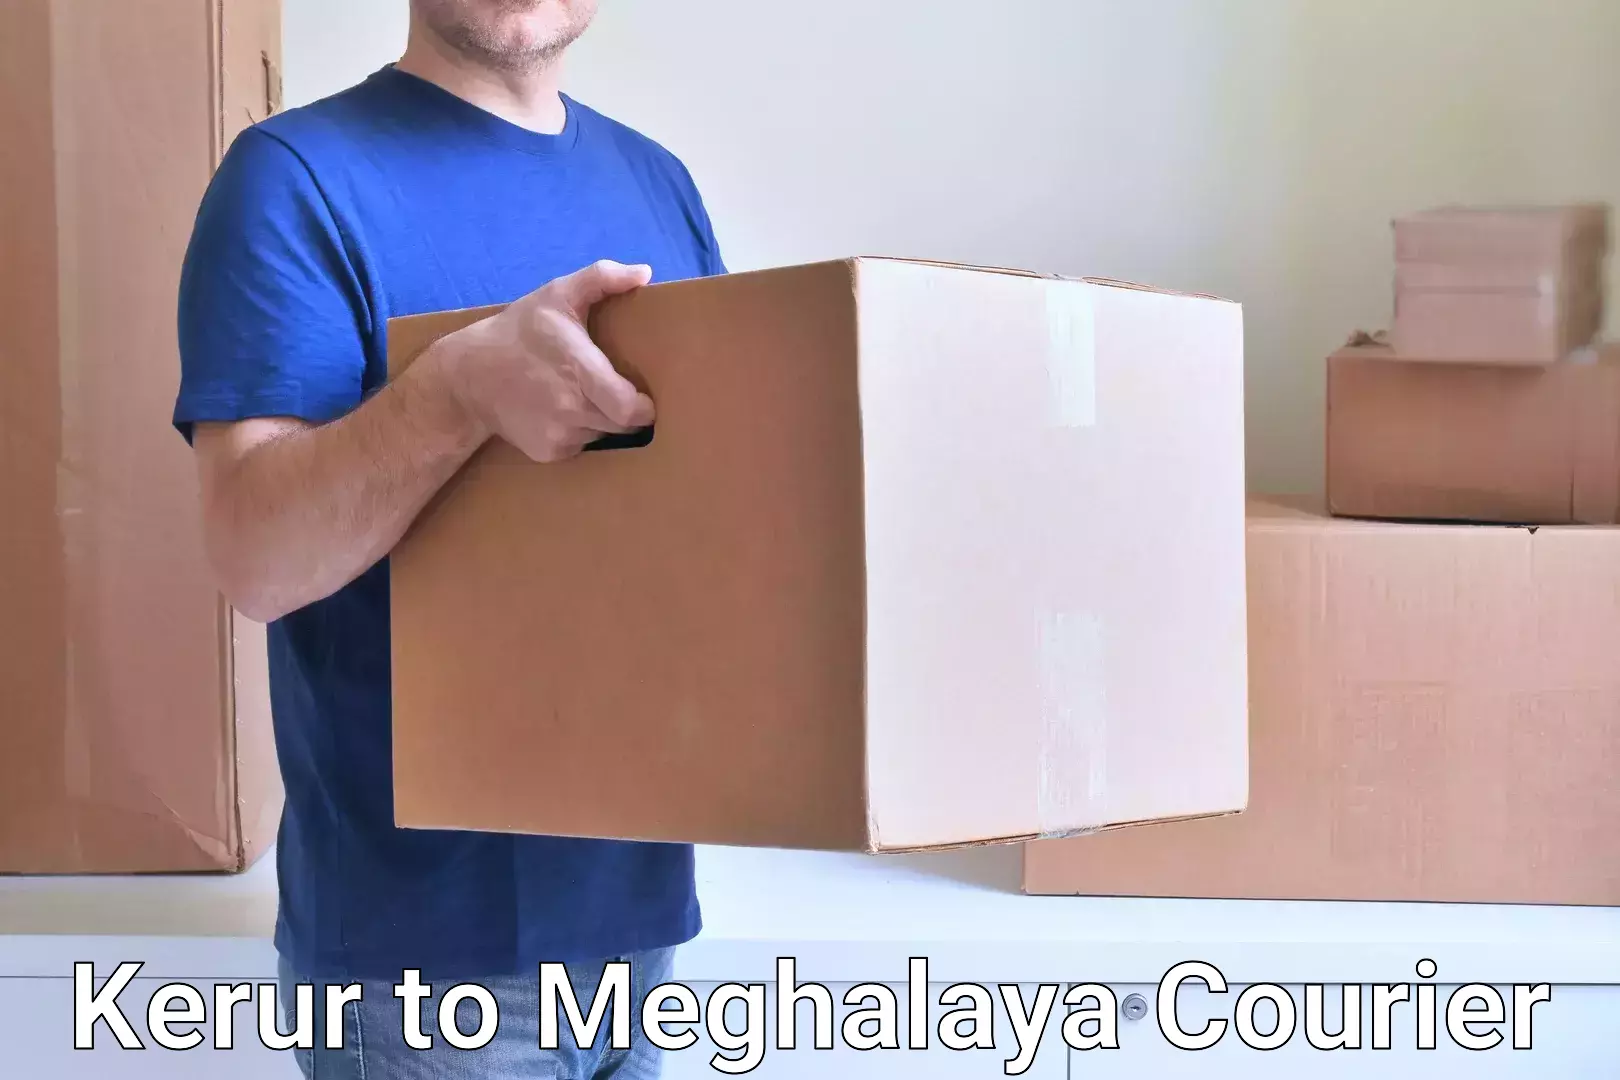 Professional courier services Kerur to Meghalaya